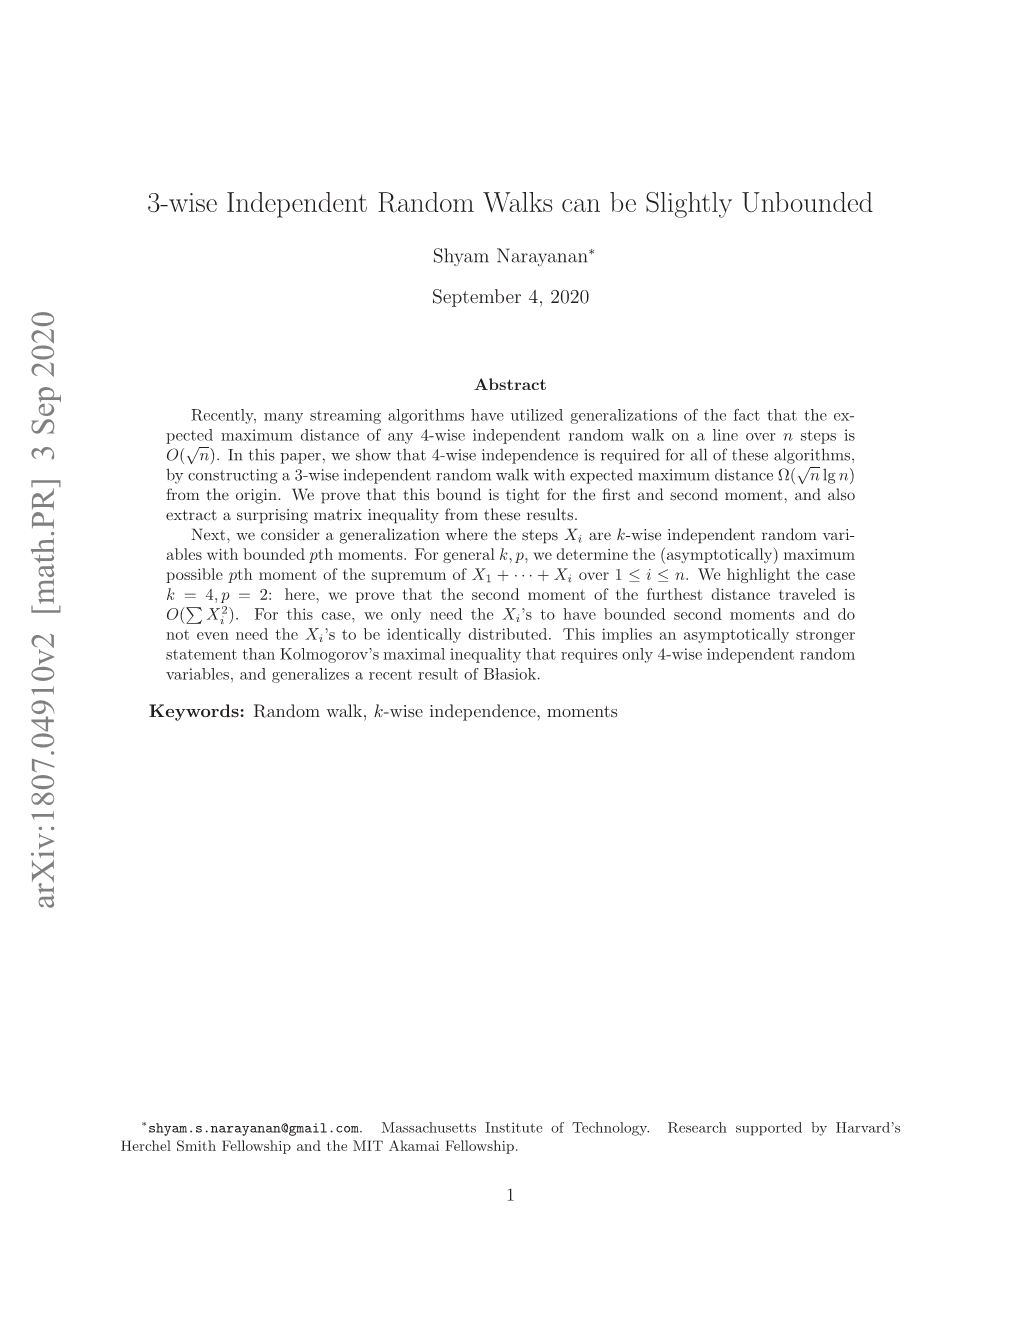 3-Wise Independent Random Walks Can Be Slightly Unbounded